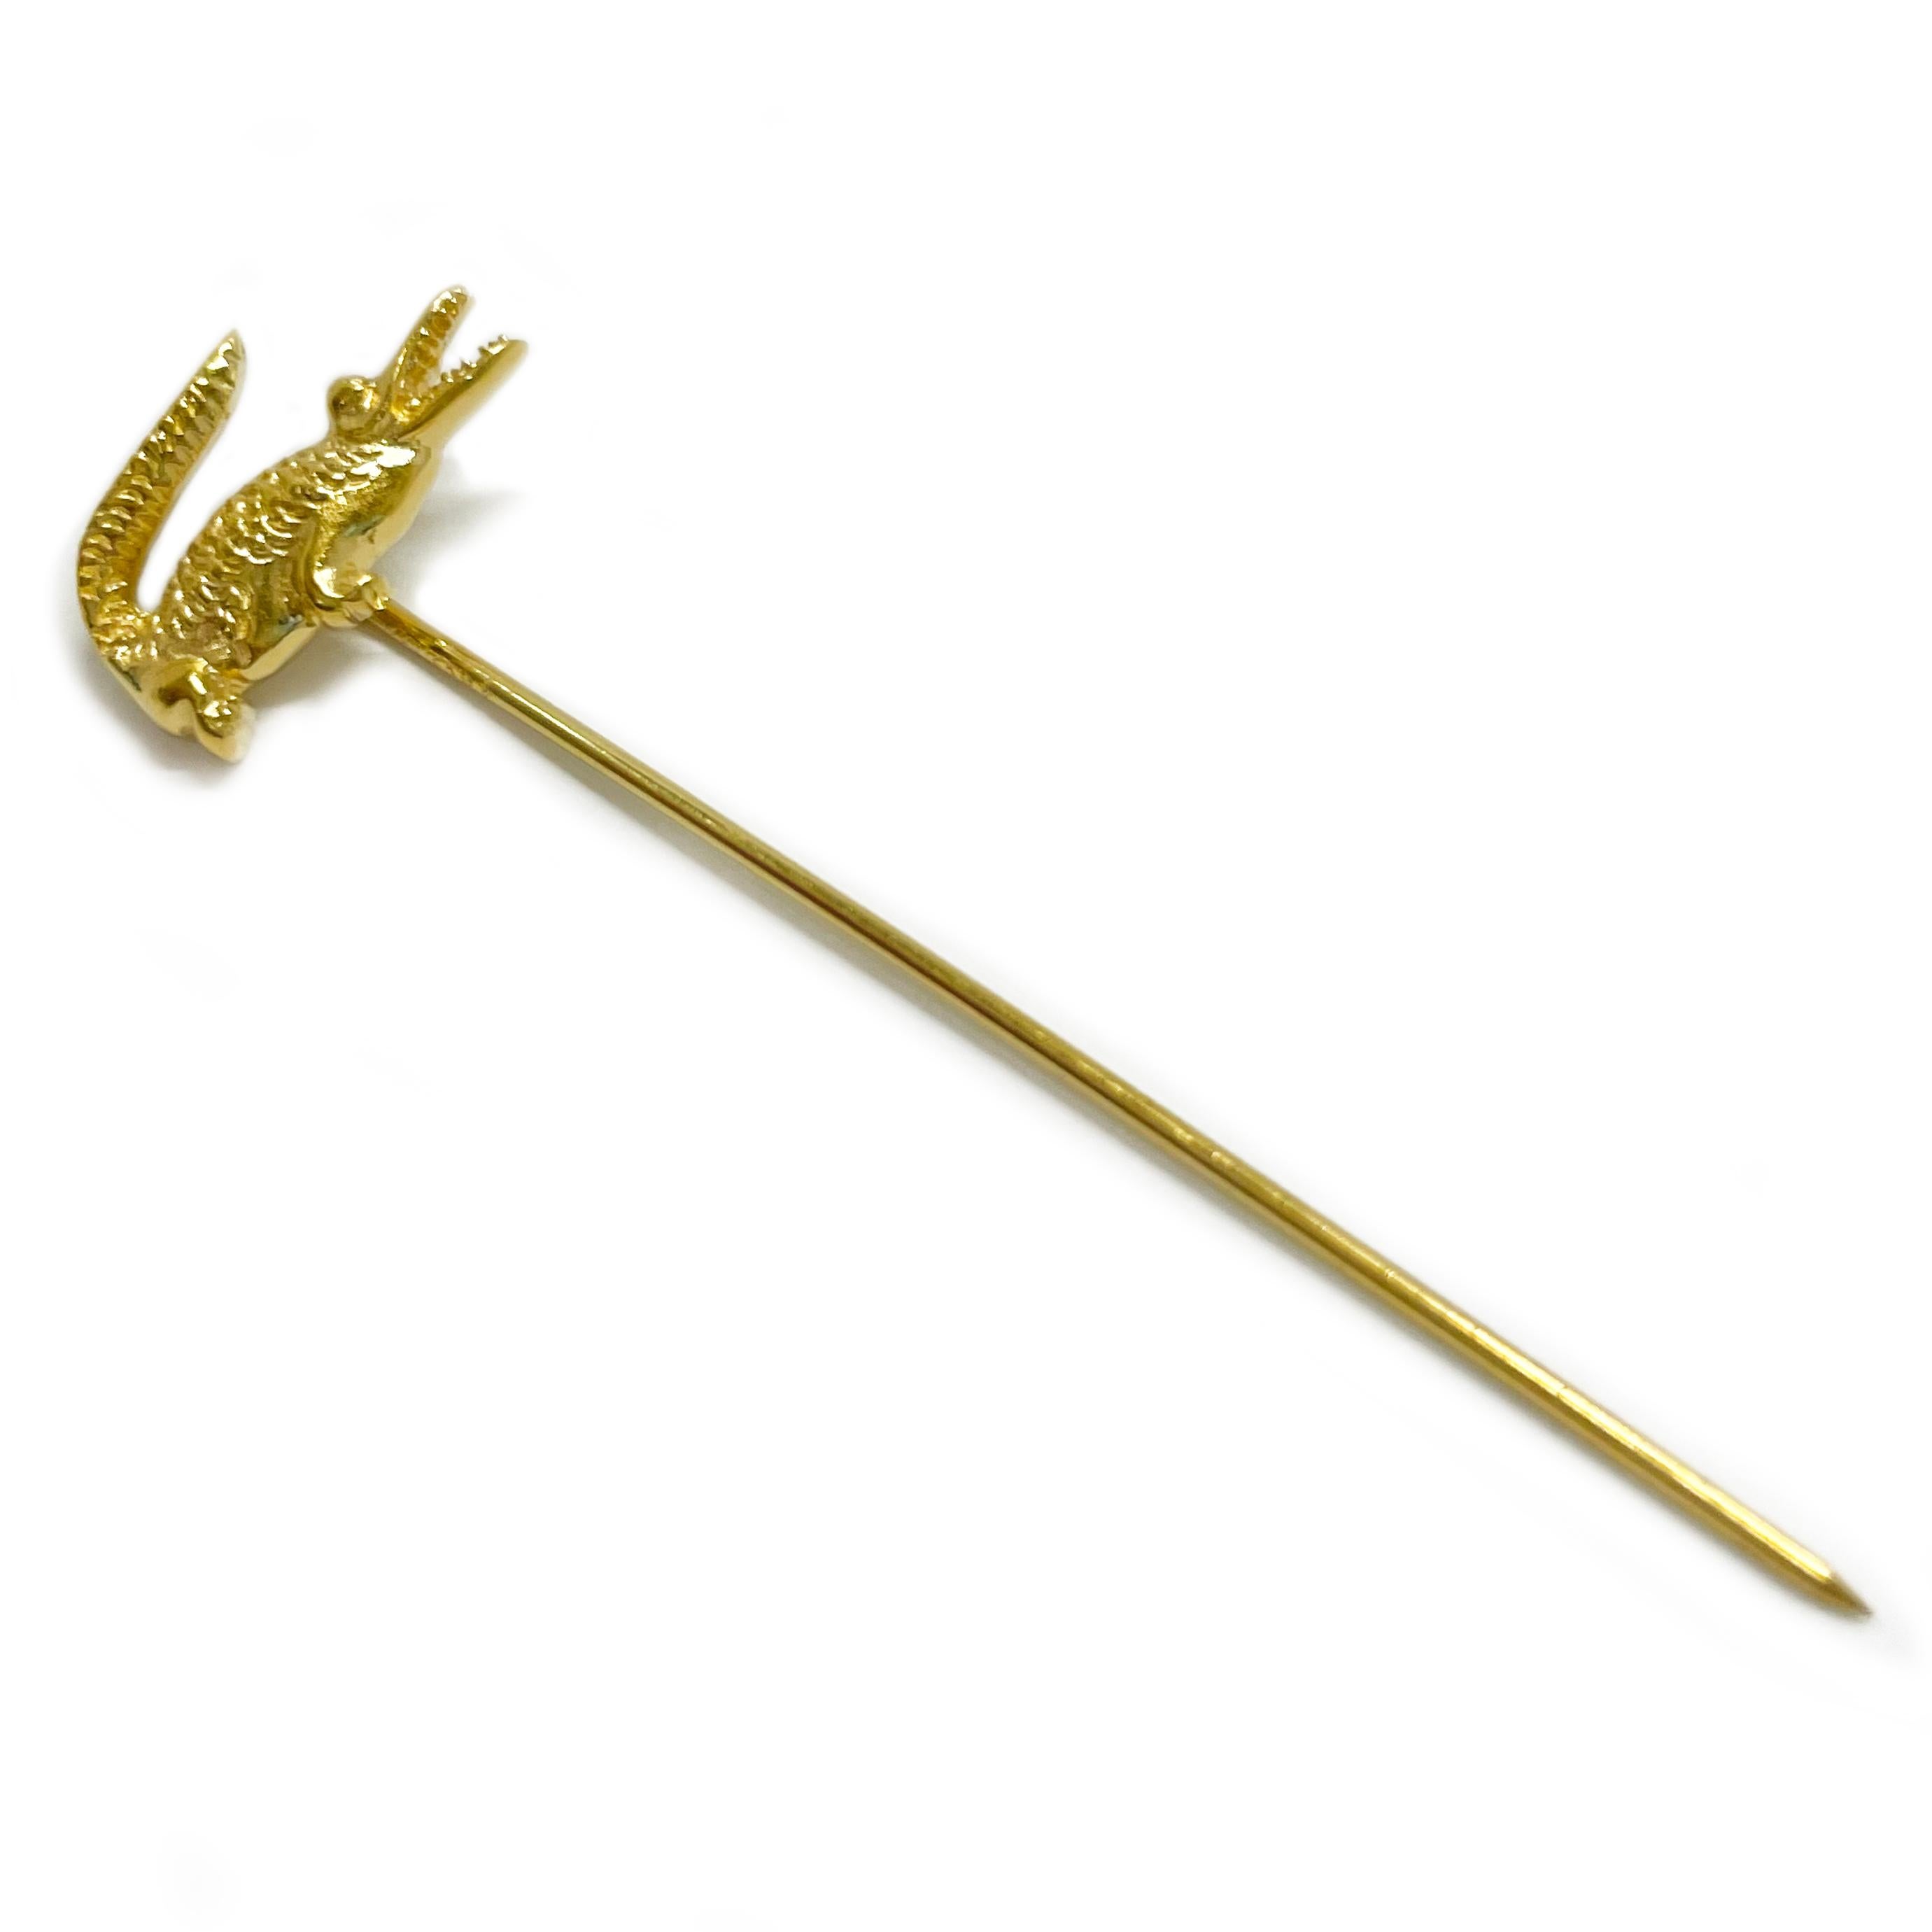 14 Karat Lacoste Yellow Gold Alligator Stick Pin. This little fellow has a highly textured body, it's mouth is open and the teeth are visible. The pin measures 8 x 15mm. The total length of the pin is 2.25